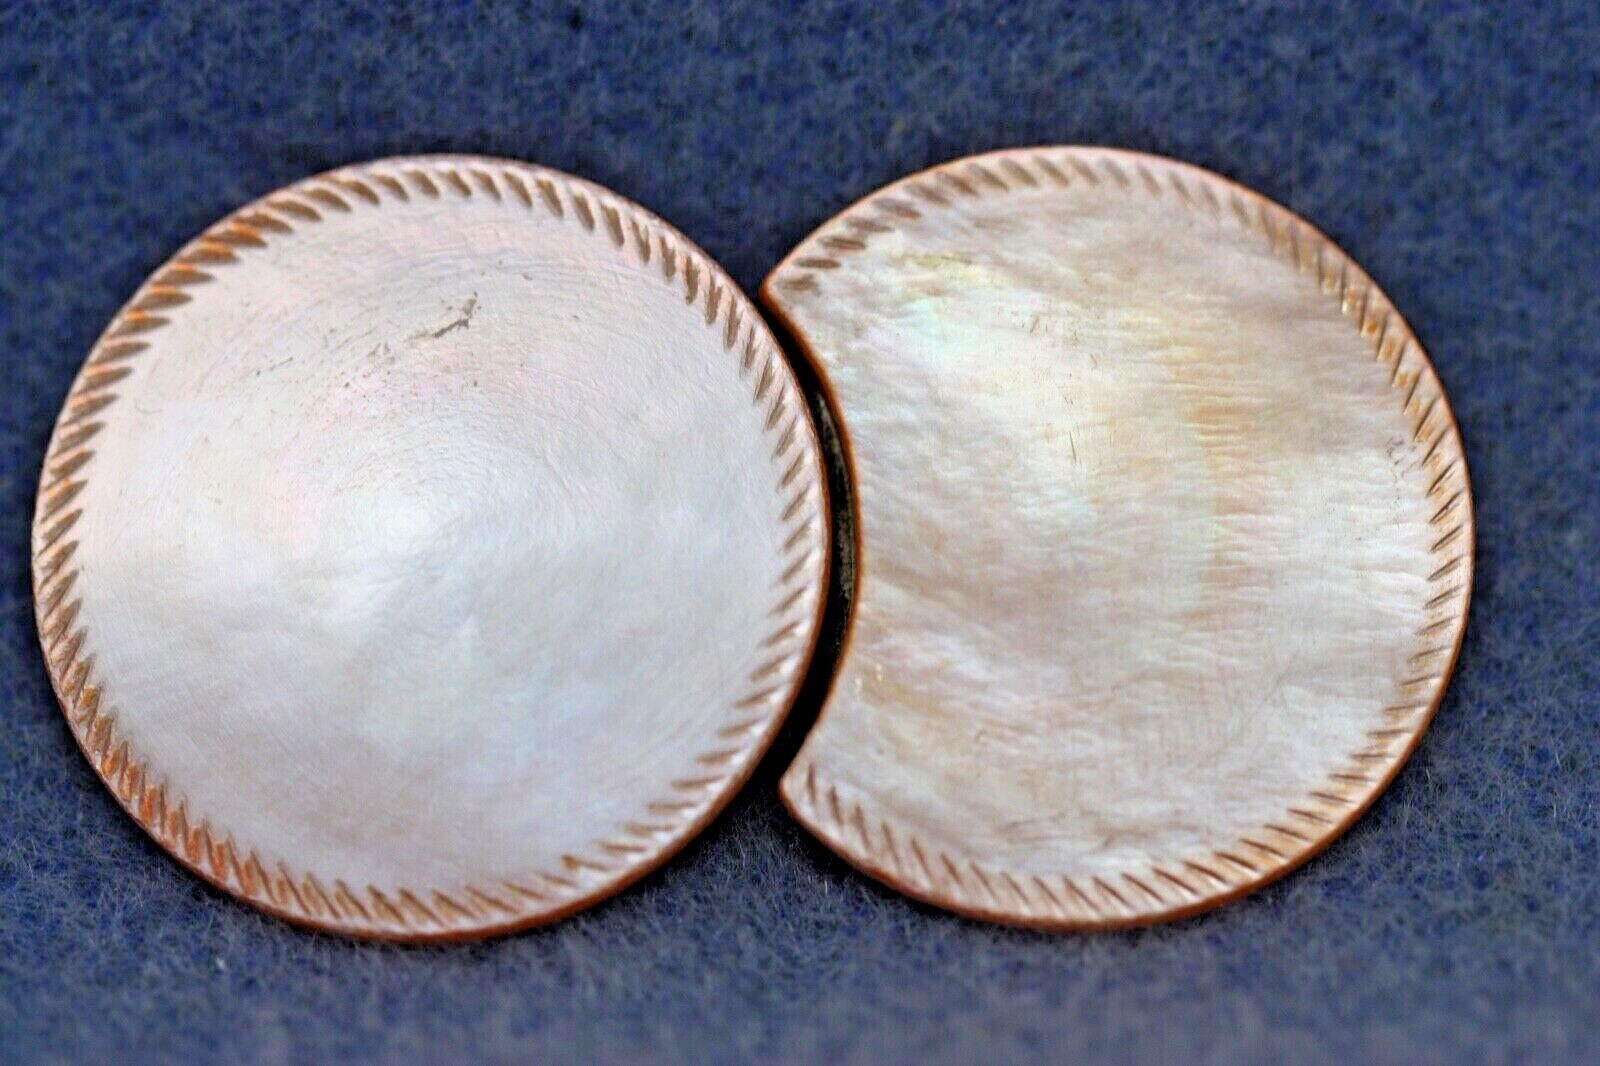 2 Piece Mother of Pearl Belt Buckle Interlock Circles Dyed Pink MOP Shell USF Co USF Co.